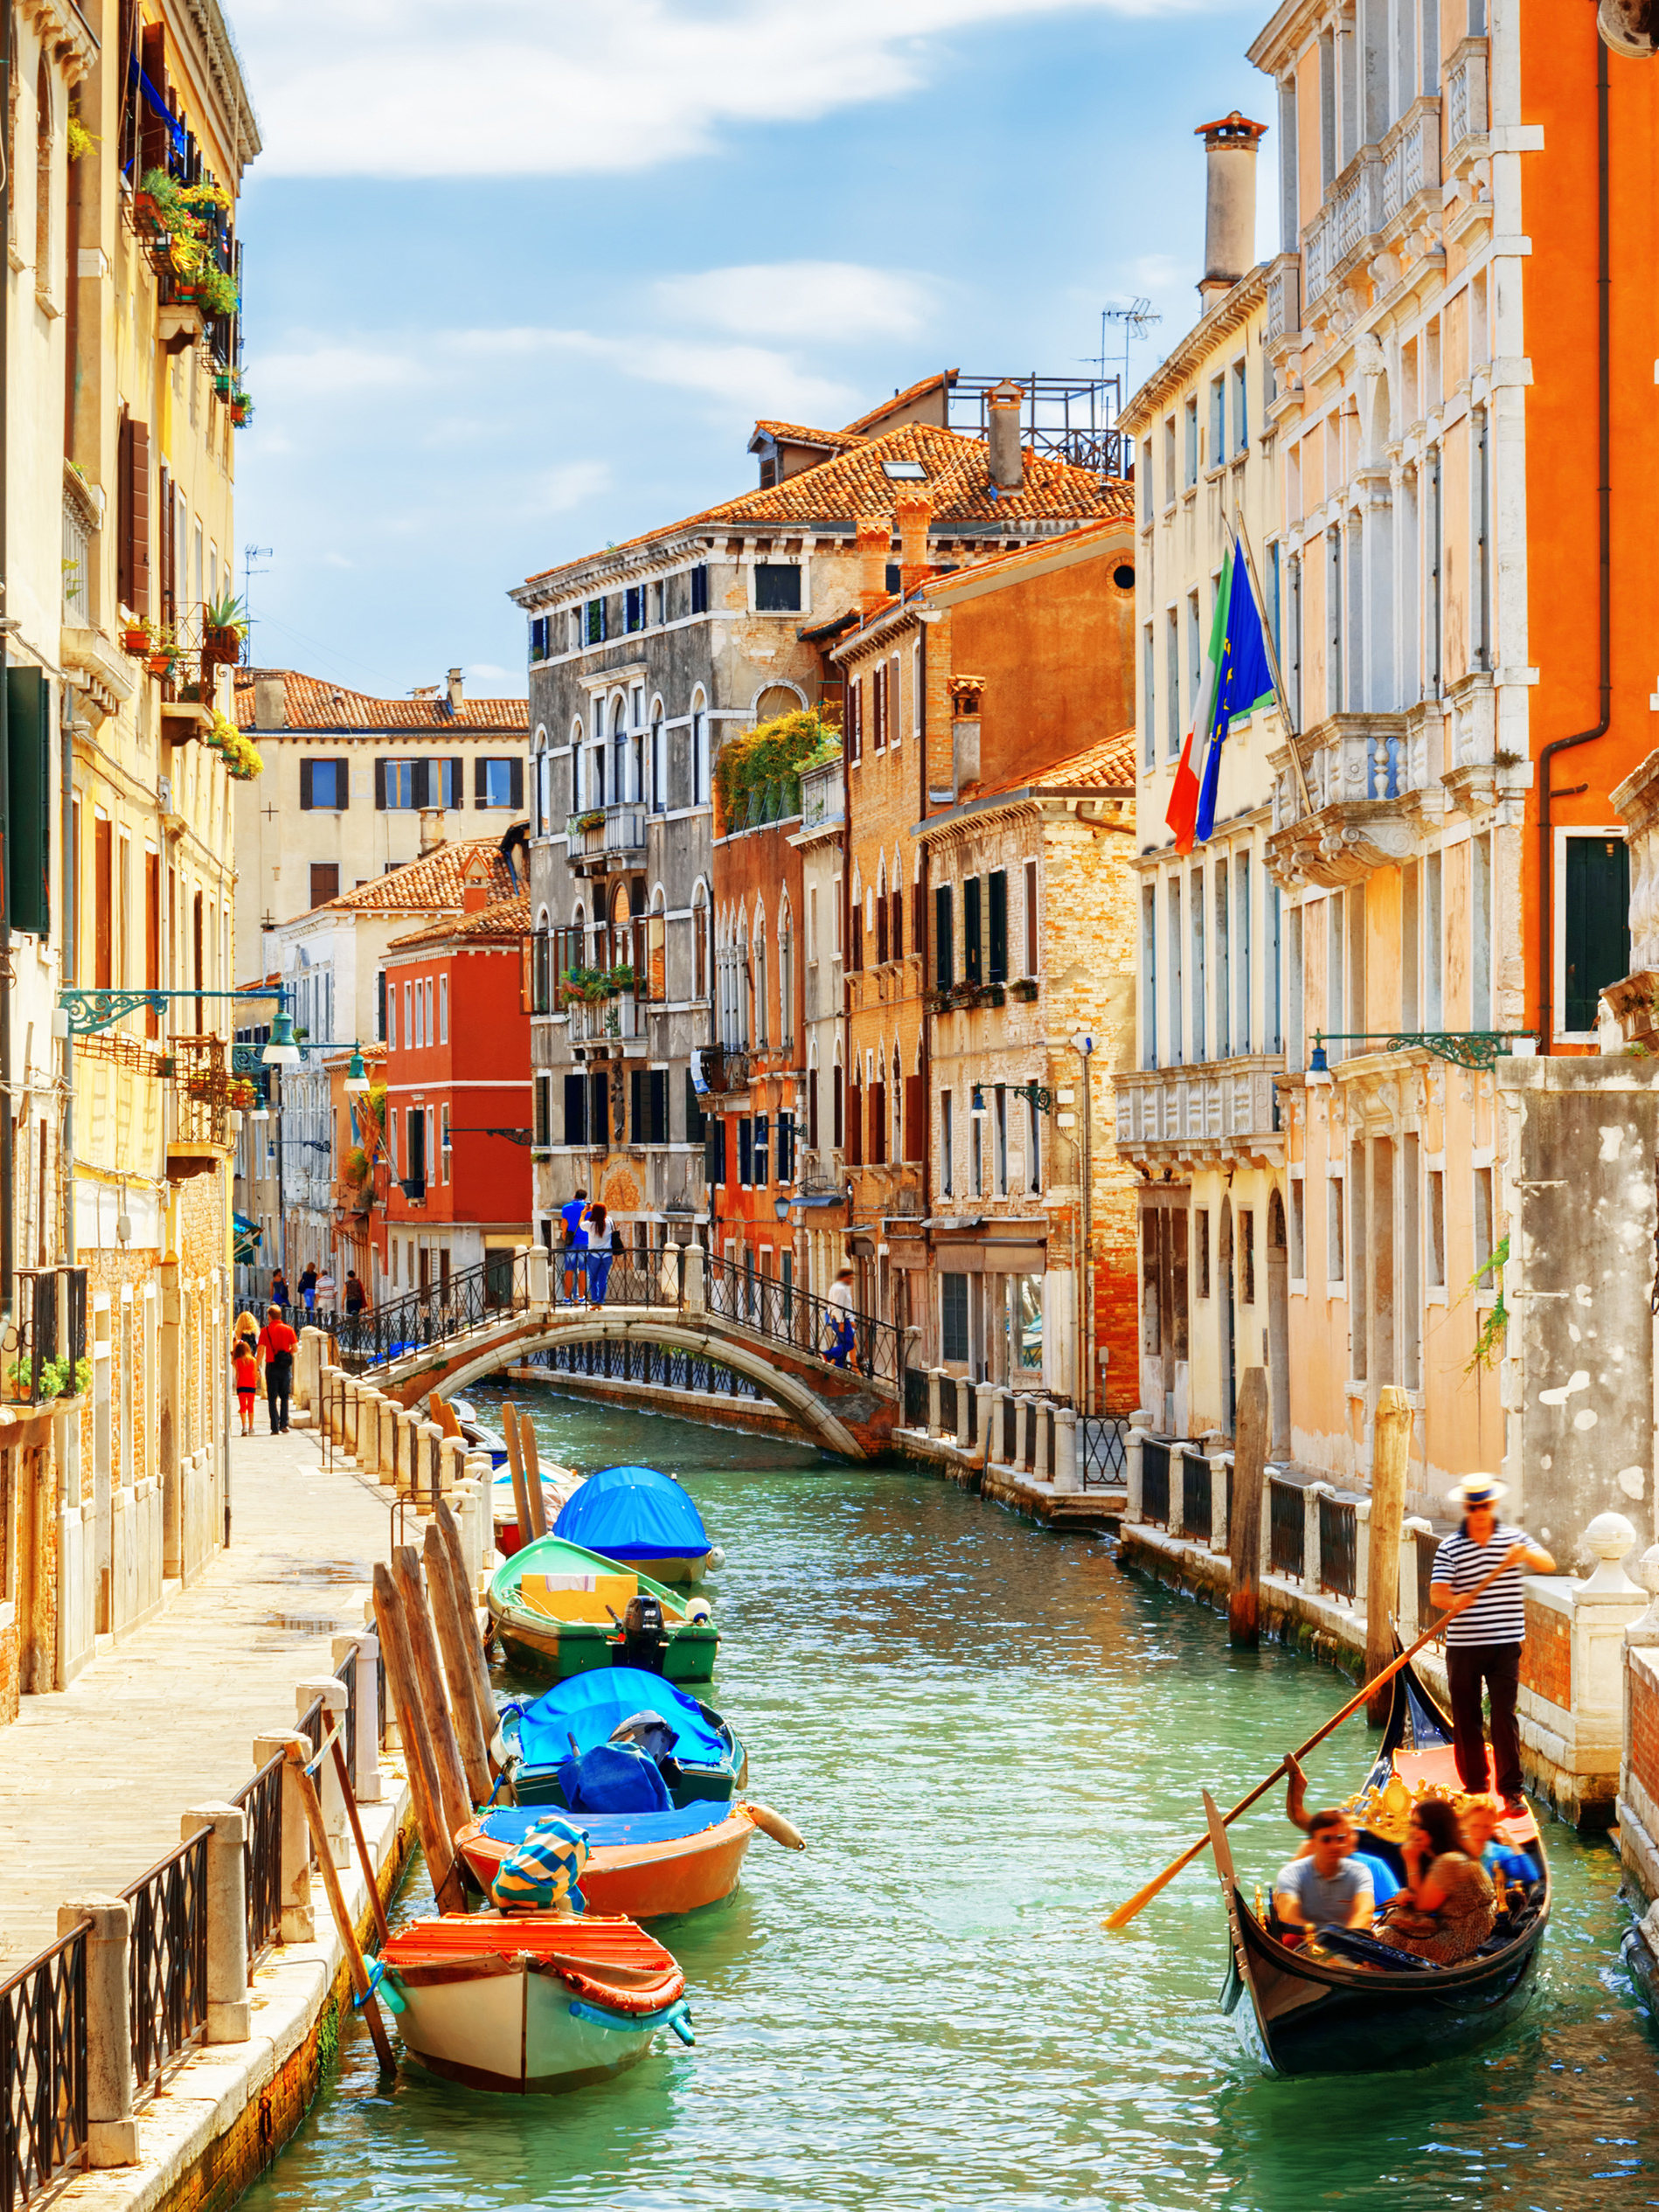 Best things to do in Venice 2021 Attractions & activities